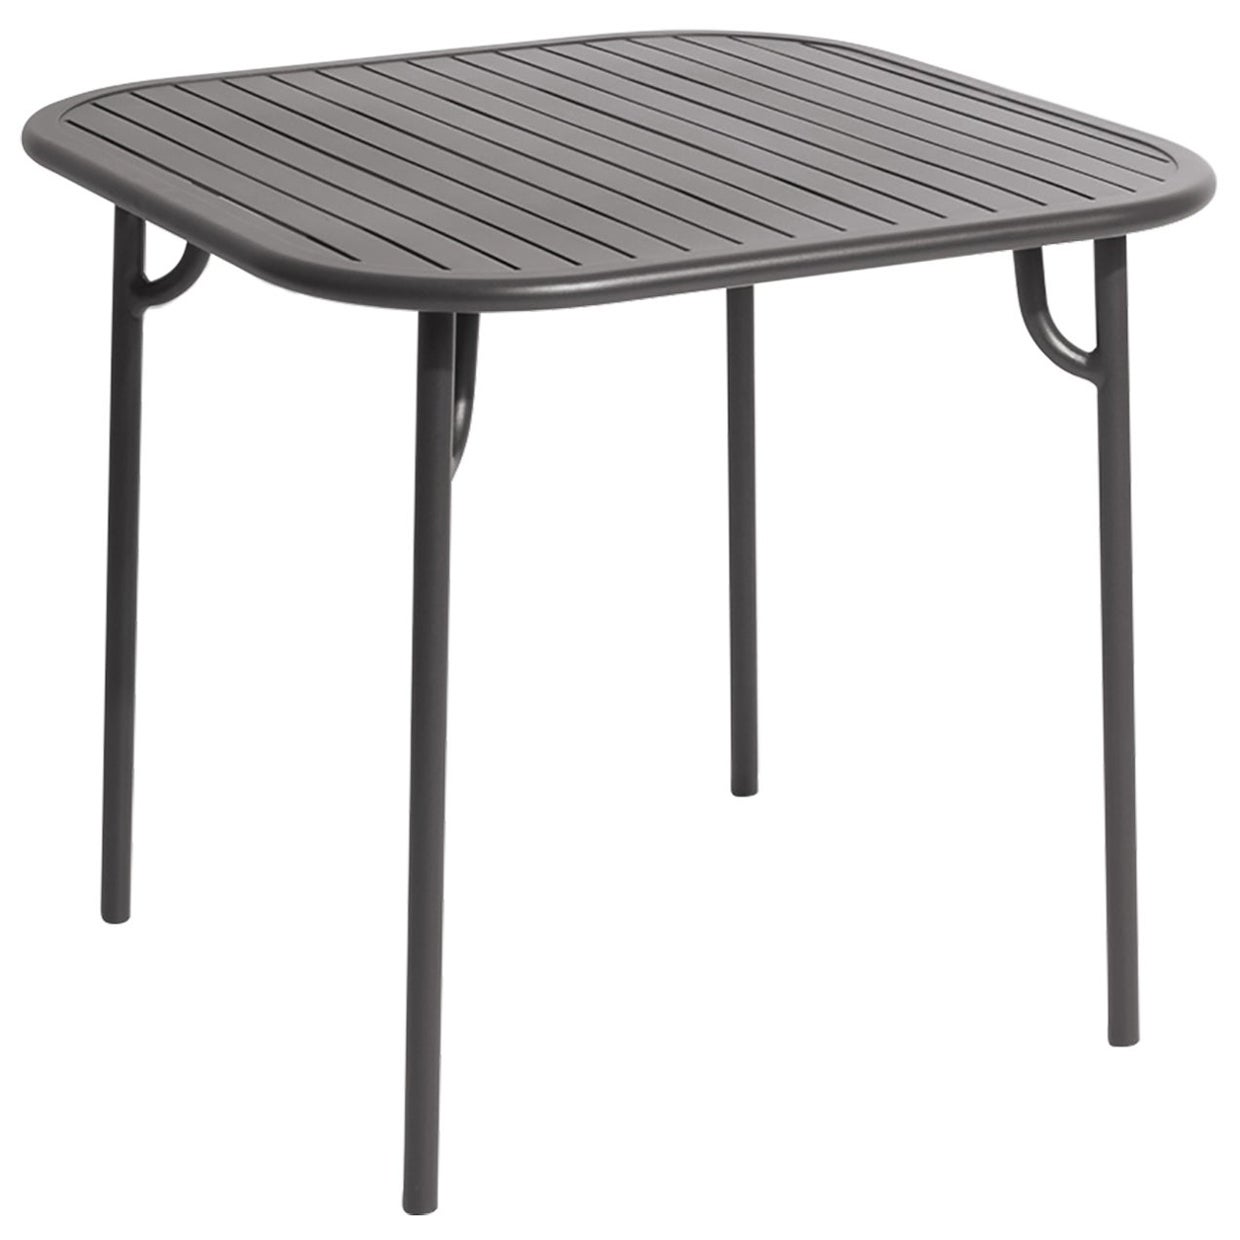 Petite Friture Week-End Square Dining Table in Anthracite Aluminium with Slats